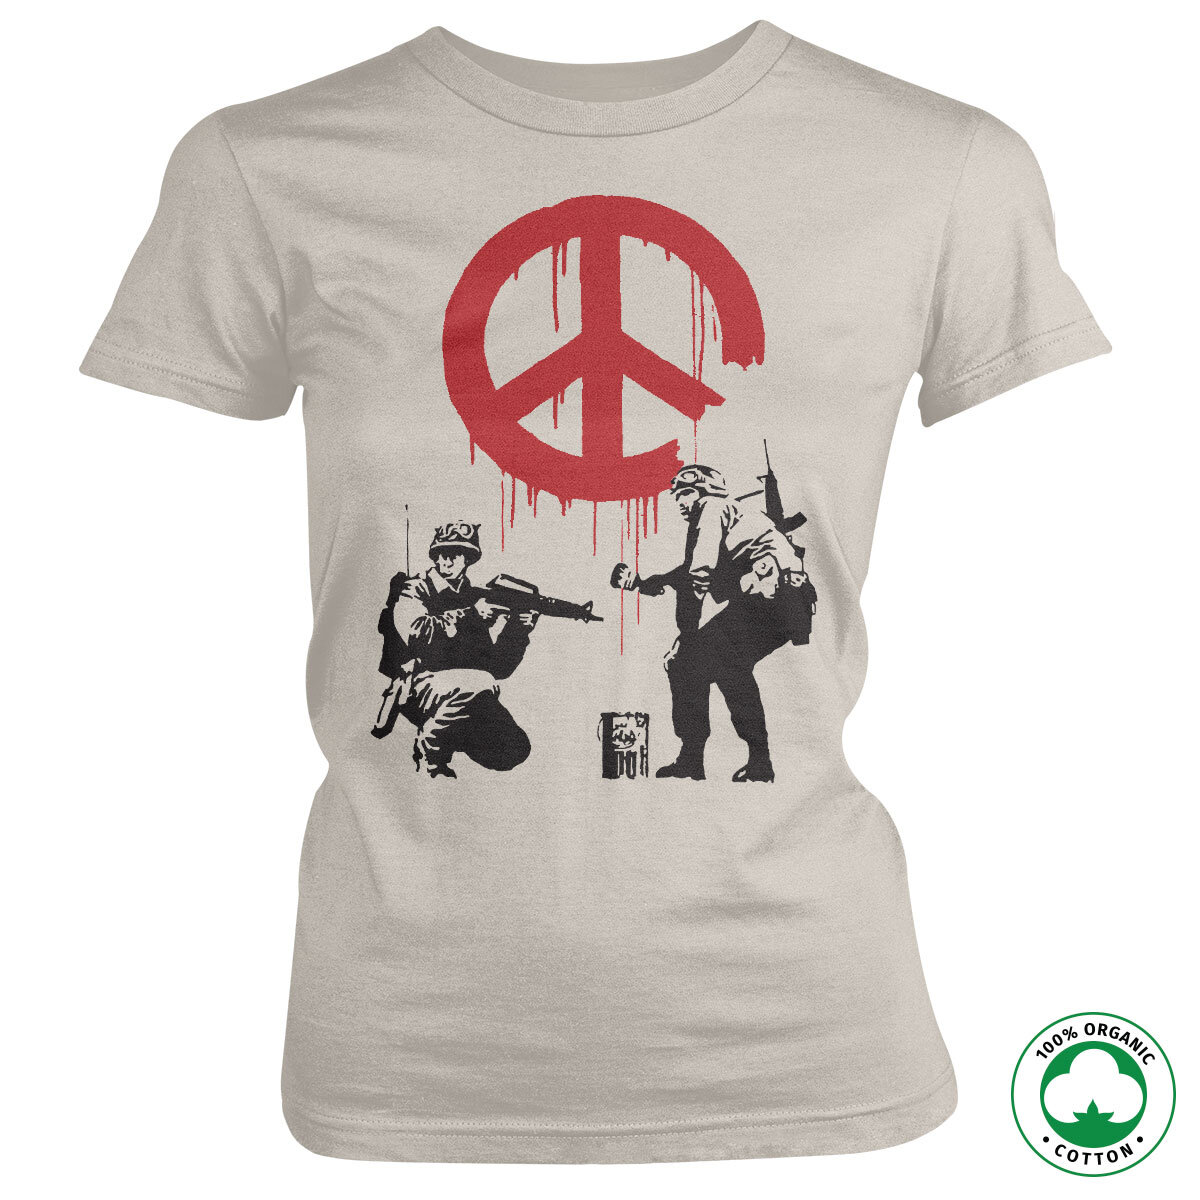 Soldiers Painting CND Sign Organic Girly Tee